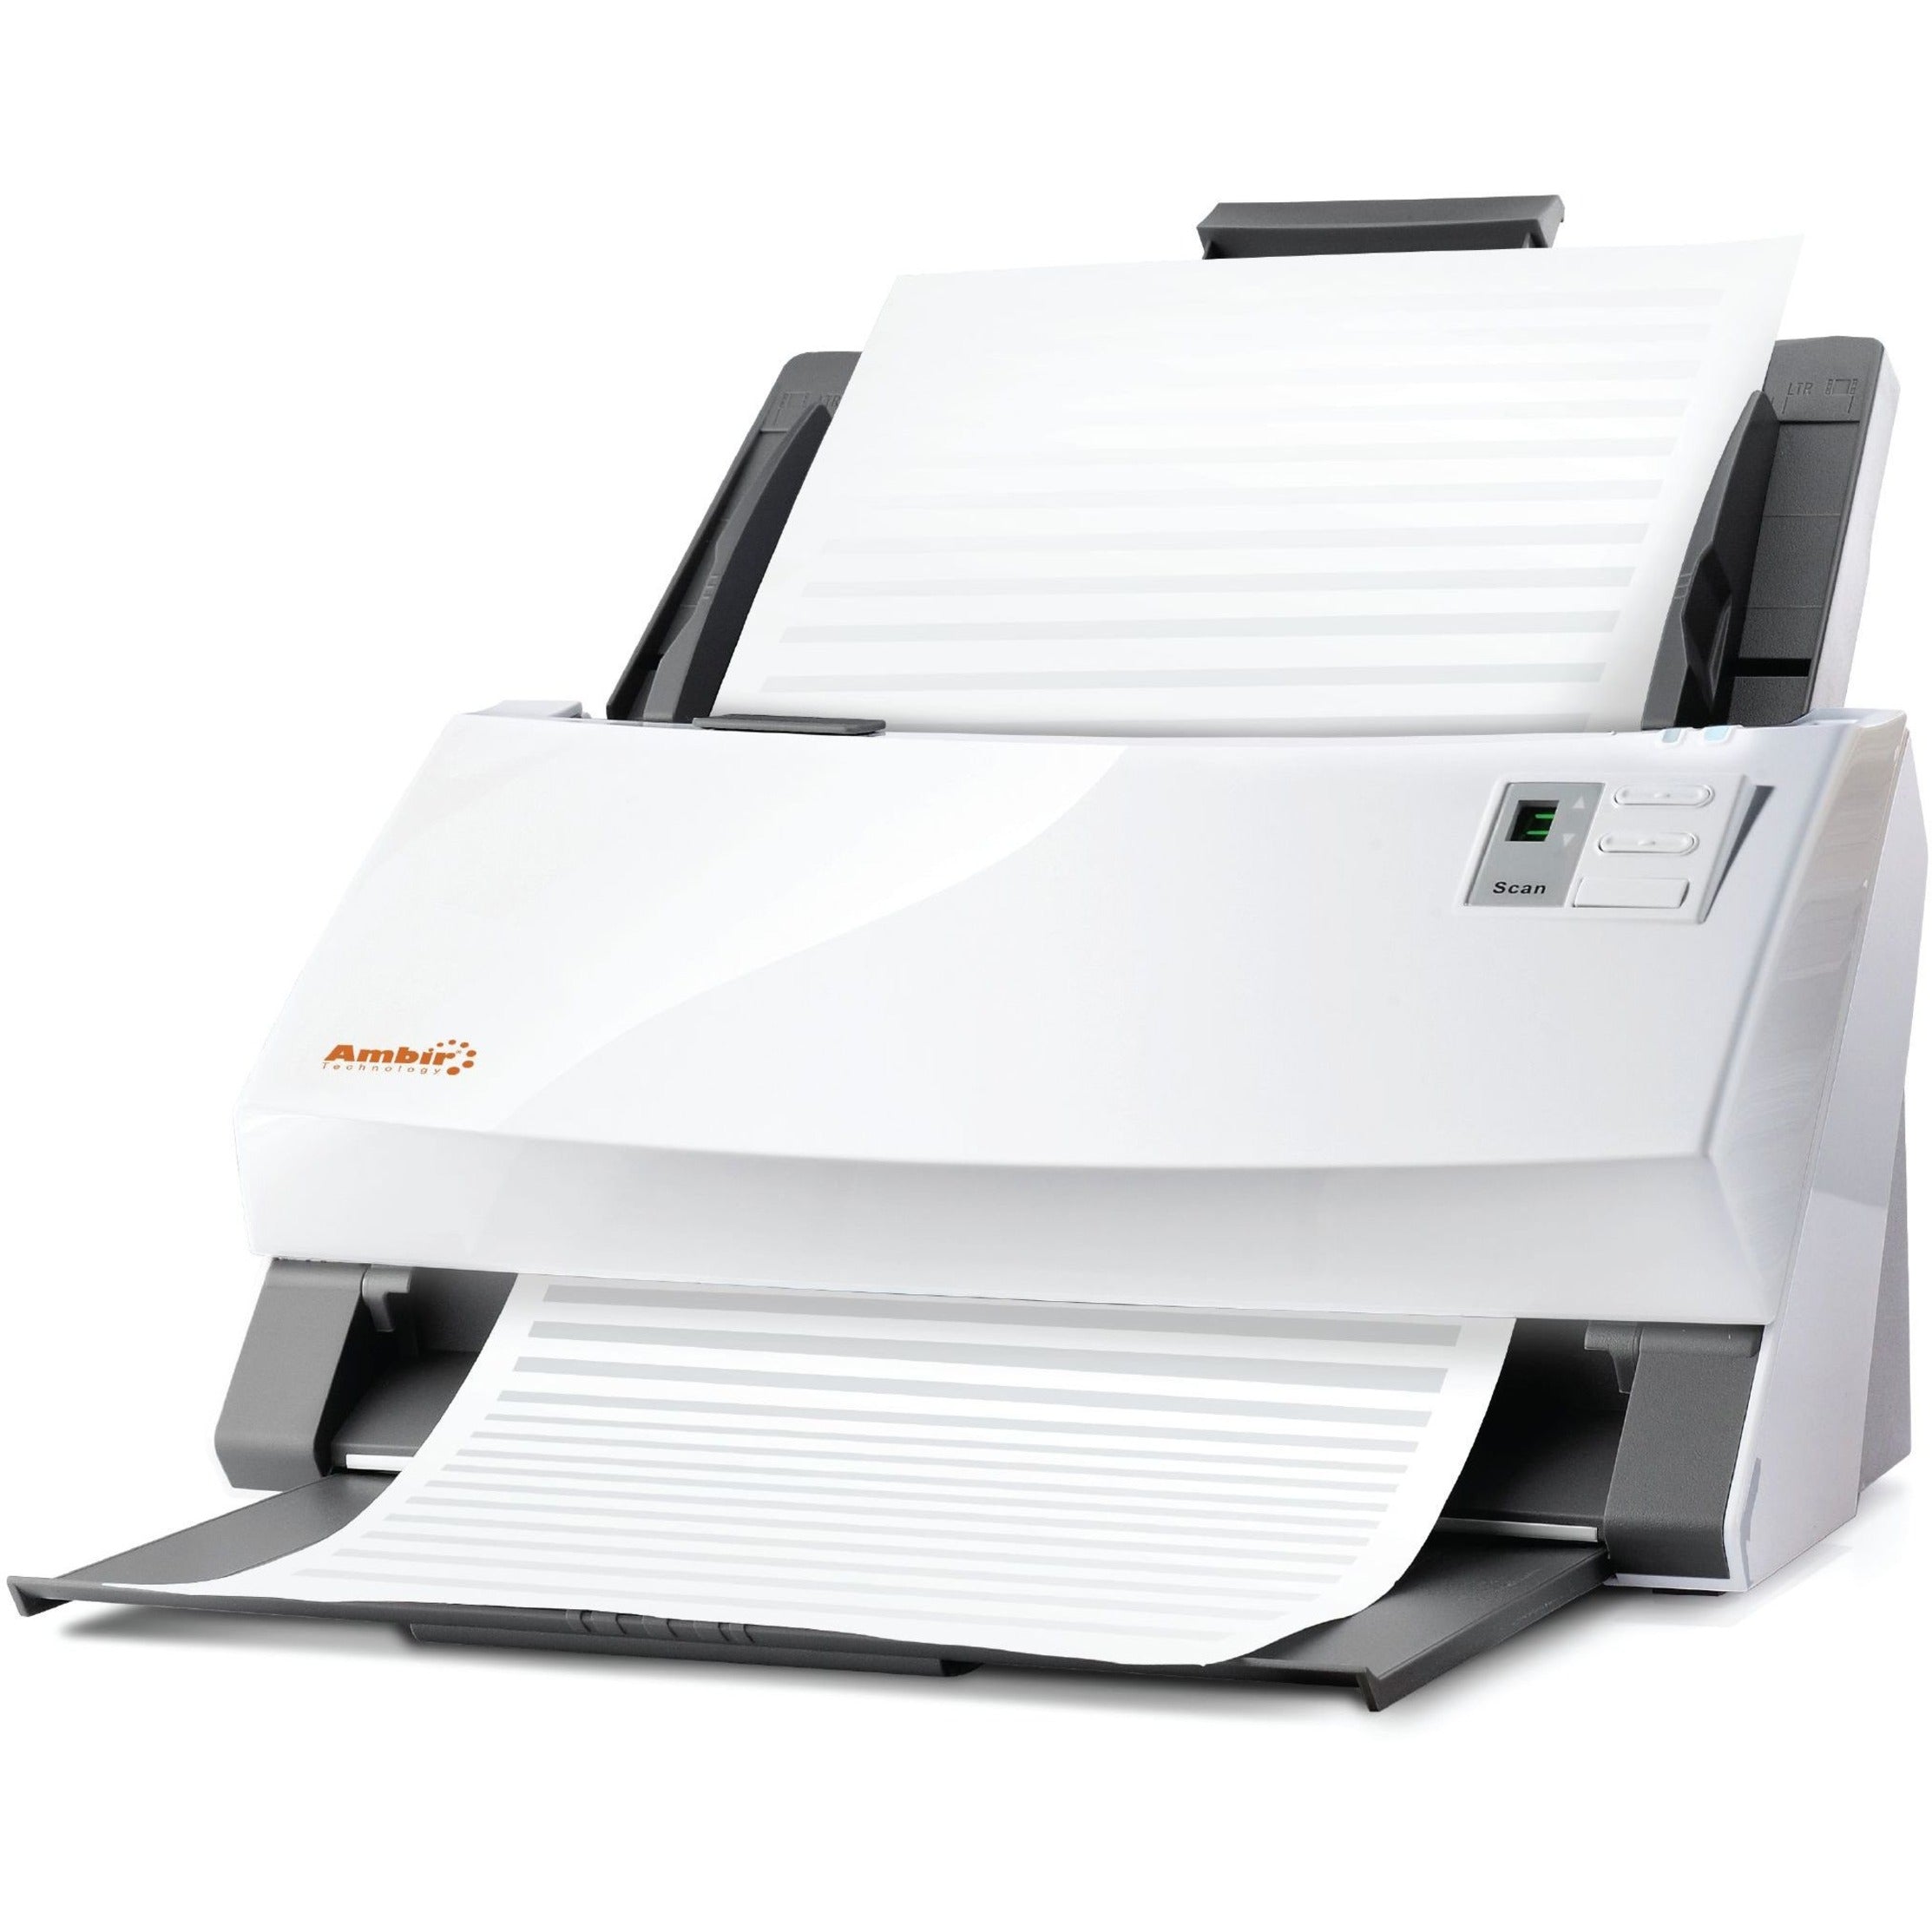 Ambir DS340-AS ImageScan Pro 340u Duplex Sheetfed Scanner - Fast and Efficient Scanning for Cards and Documents